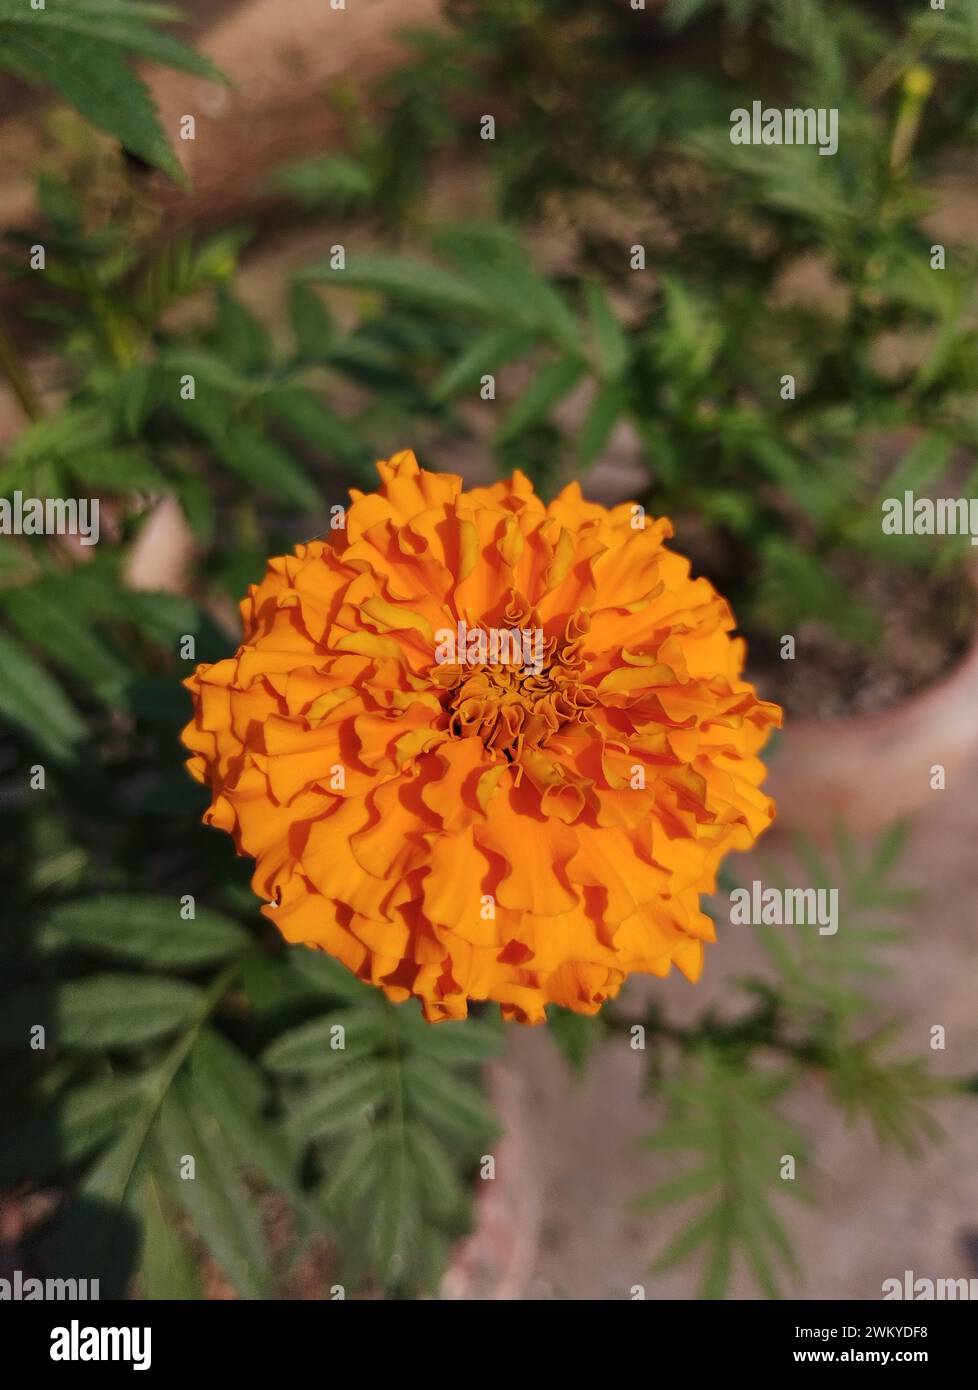 A vibrant yellow Marigolds parviflora flower amidst lush green foliage and rocks Stock Photo